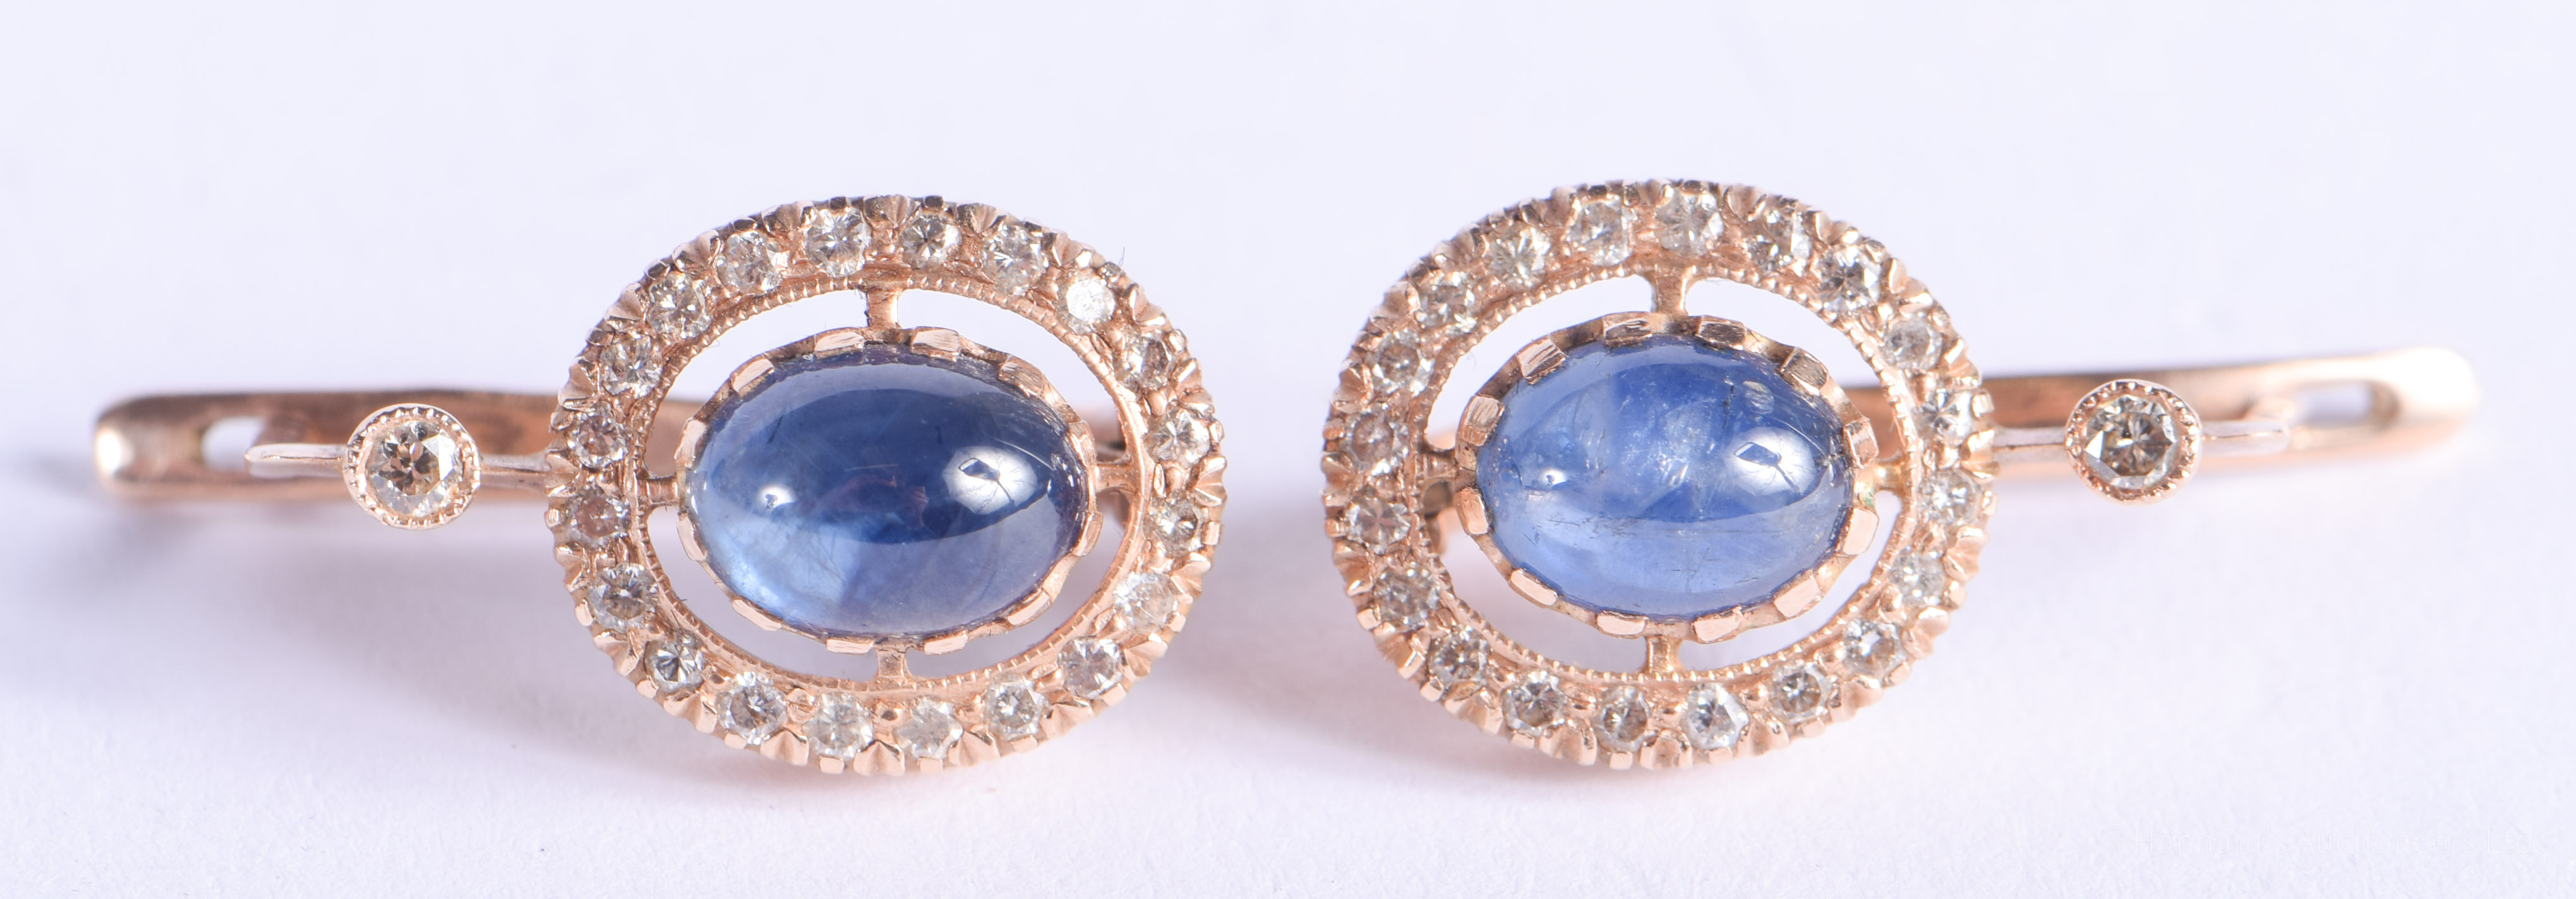 A PAIR OF 14CT GOLD DIAMOND AND SAPPHIRE EARRINGS. 6.2 grams. 1.8 cm long.